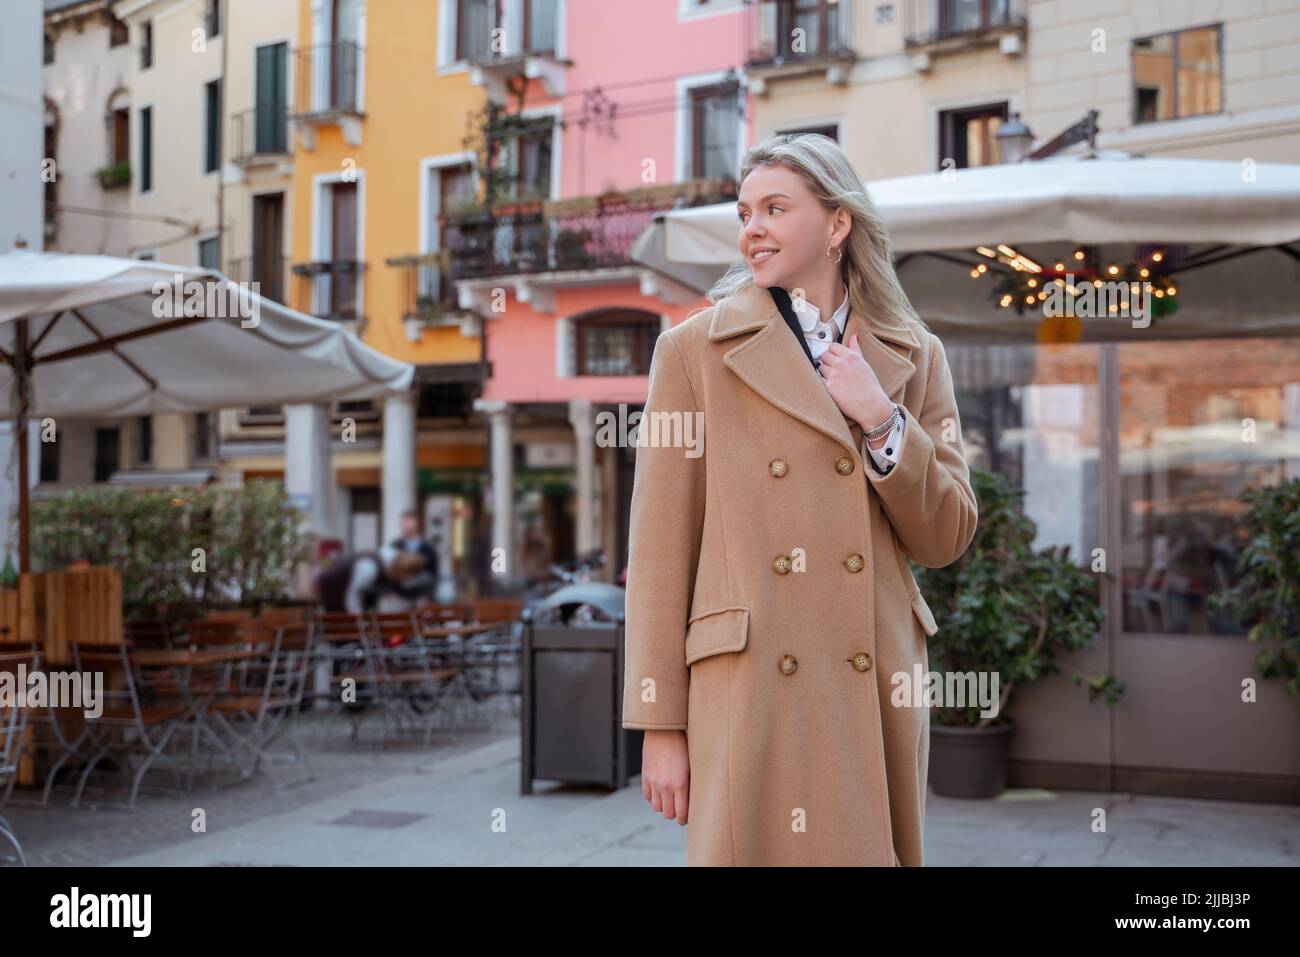 Female tourist gazing into the distance during the city walk Stock Photo